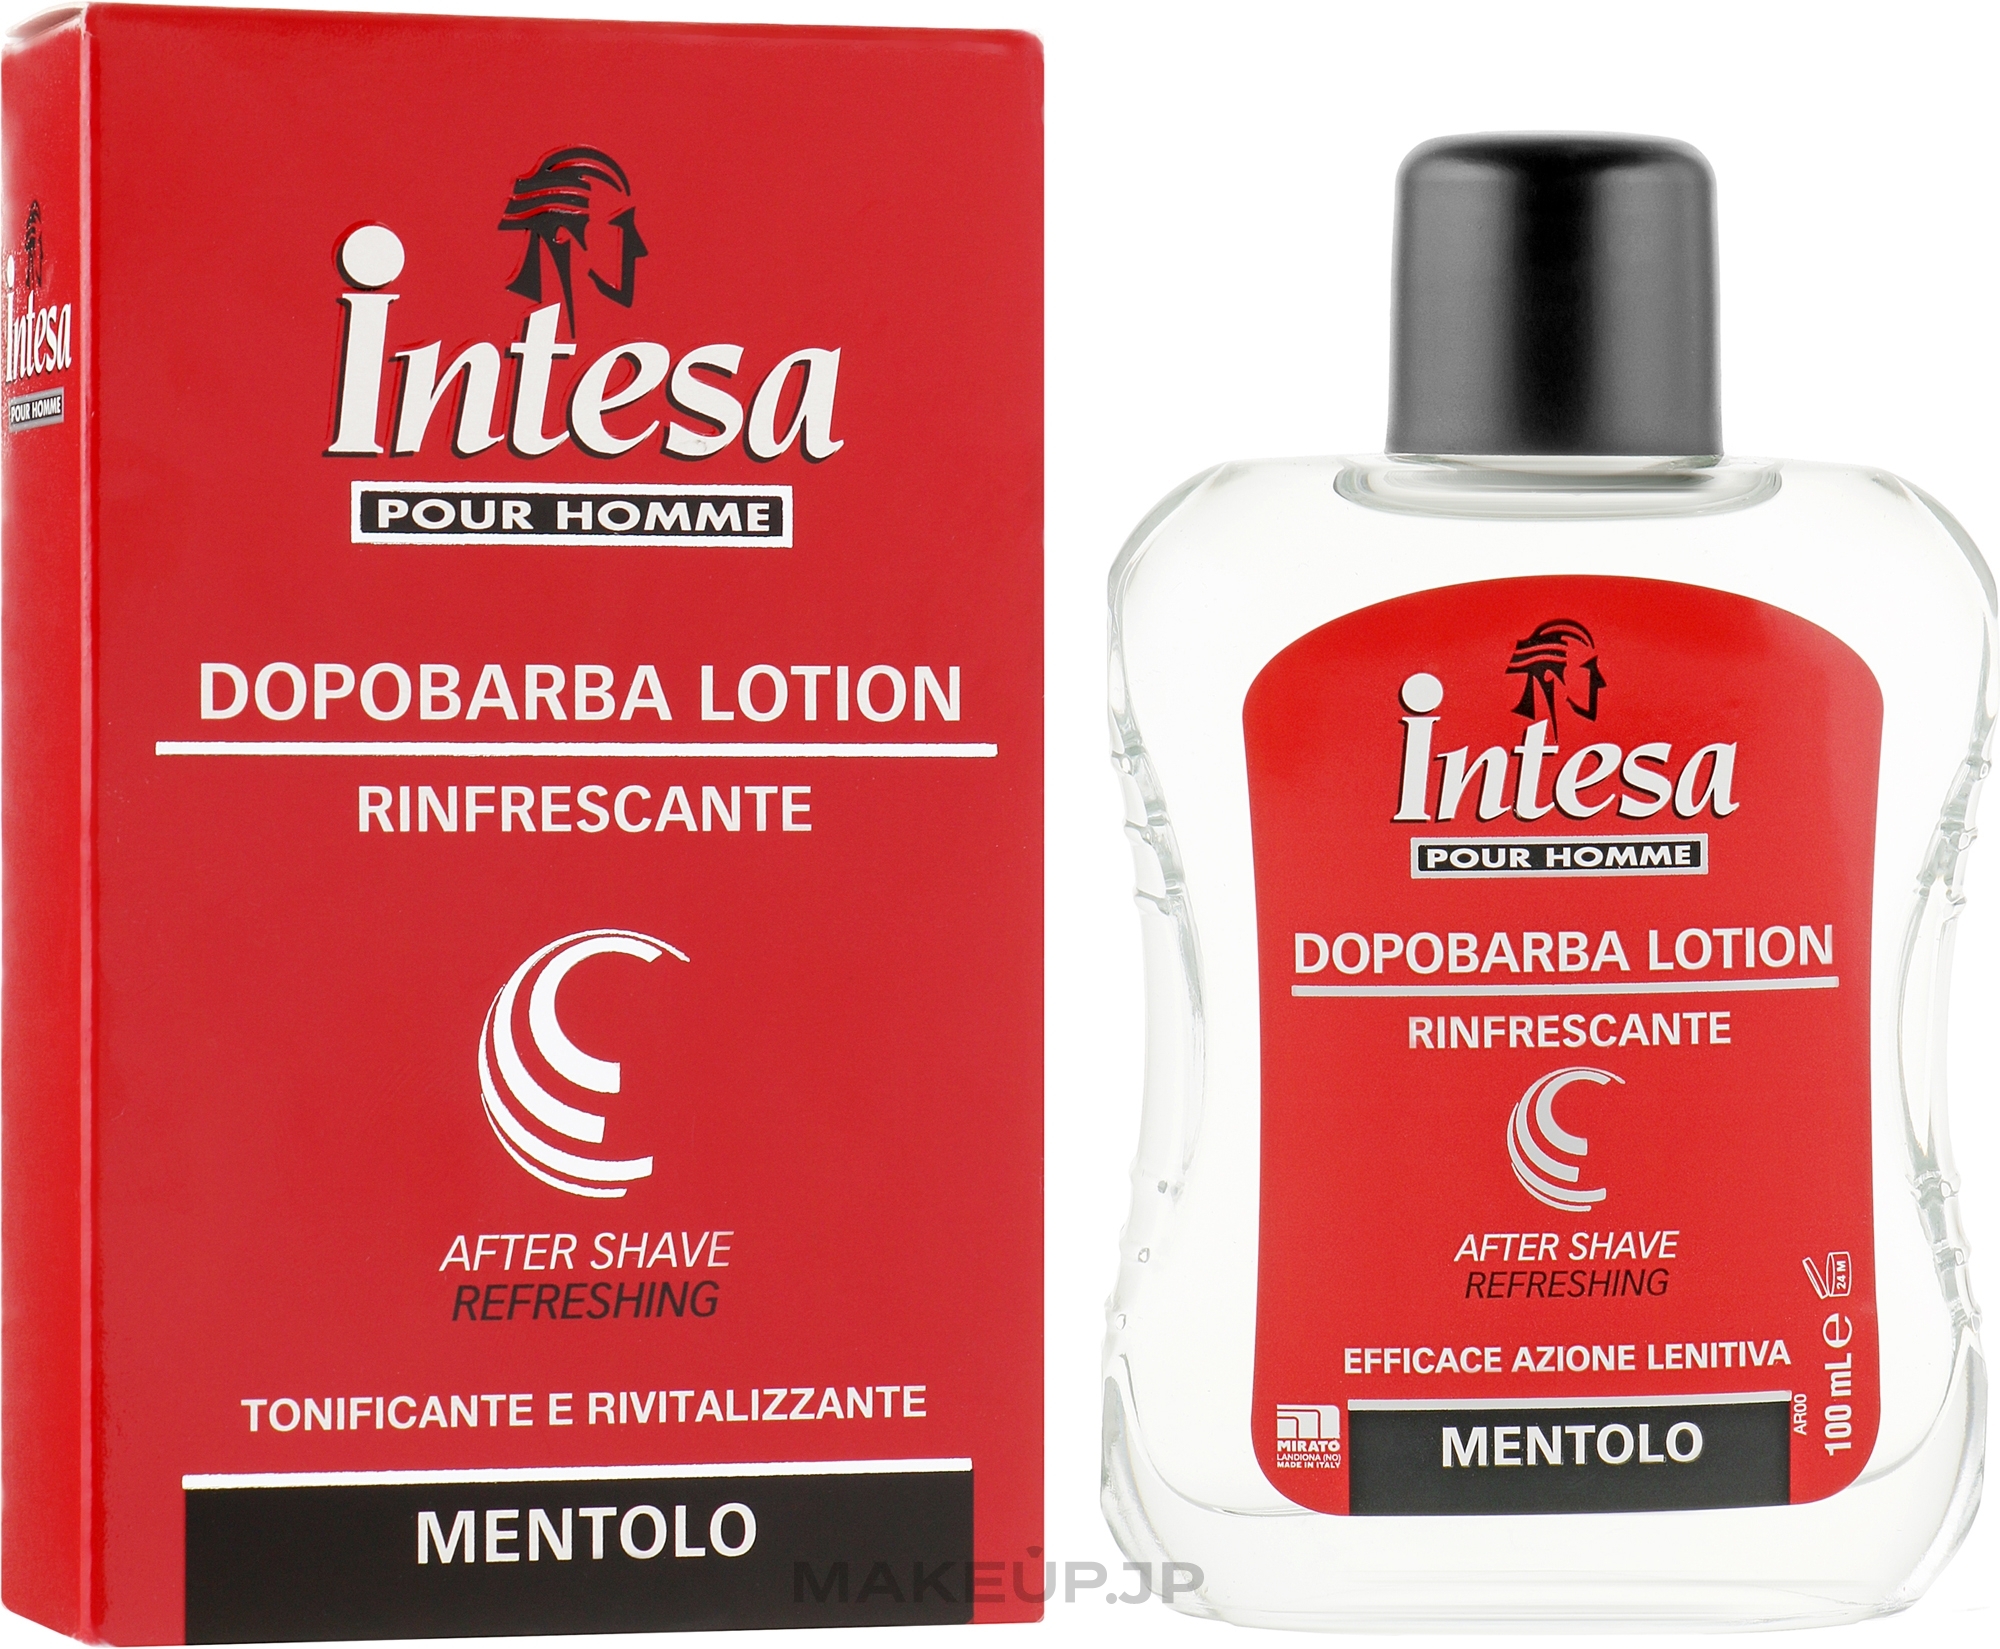 After Shave Refreshing Lotion - Intesa Classic Black Afer Shave Refreshing — photo 100 ml